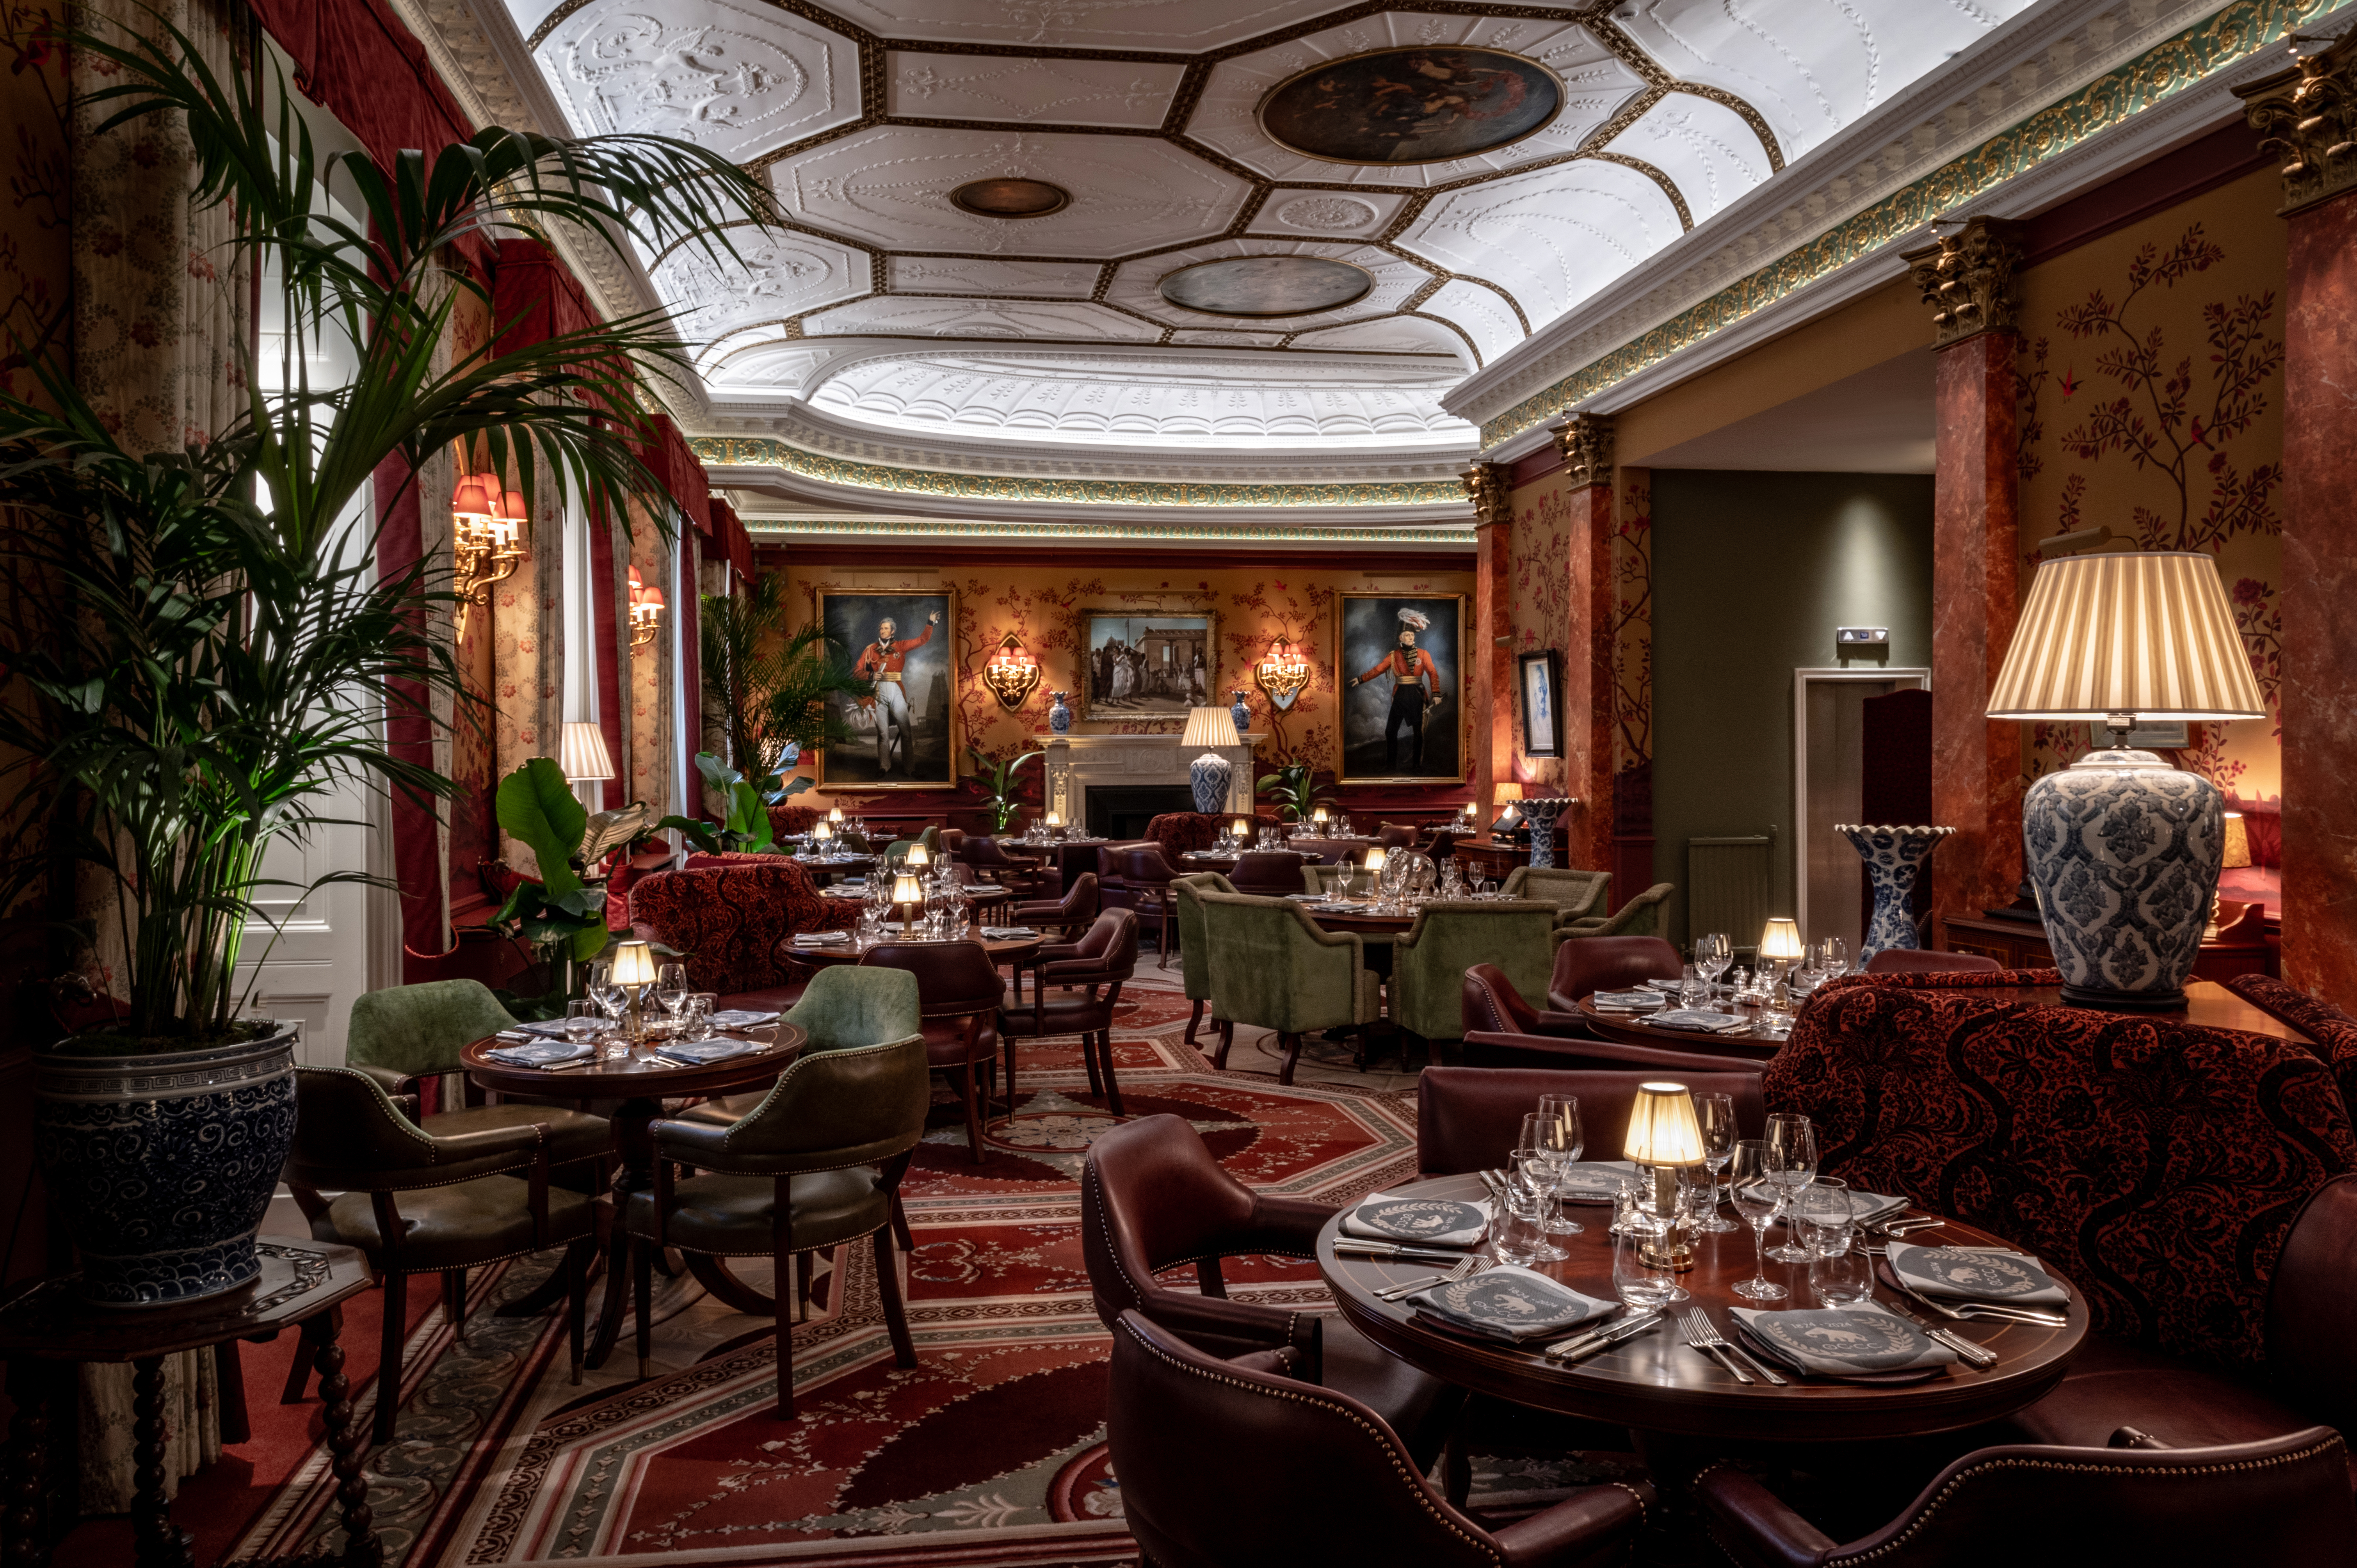 Oriental Club 200 Year Legacy - The new dining designed by Russel Sage Studio